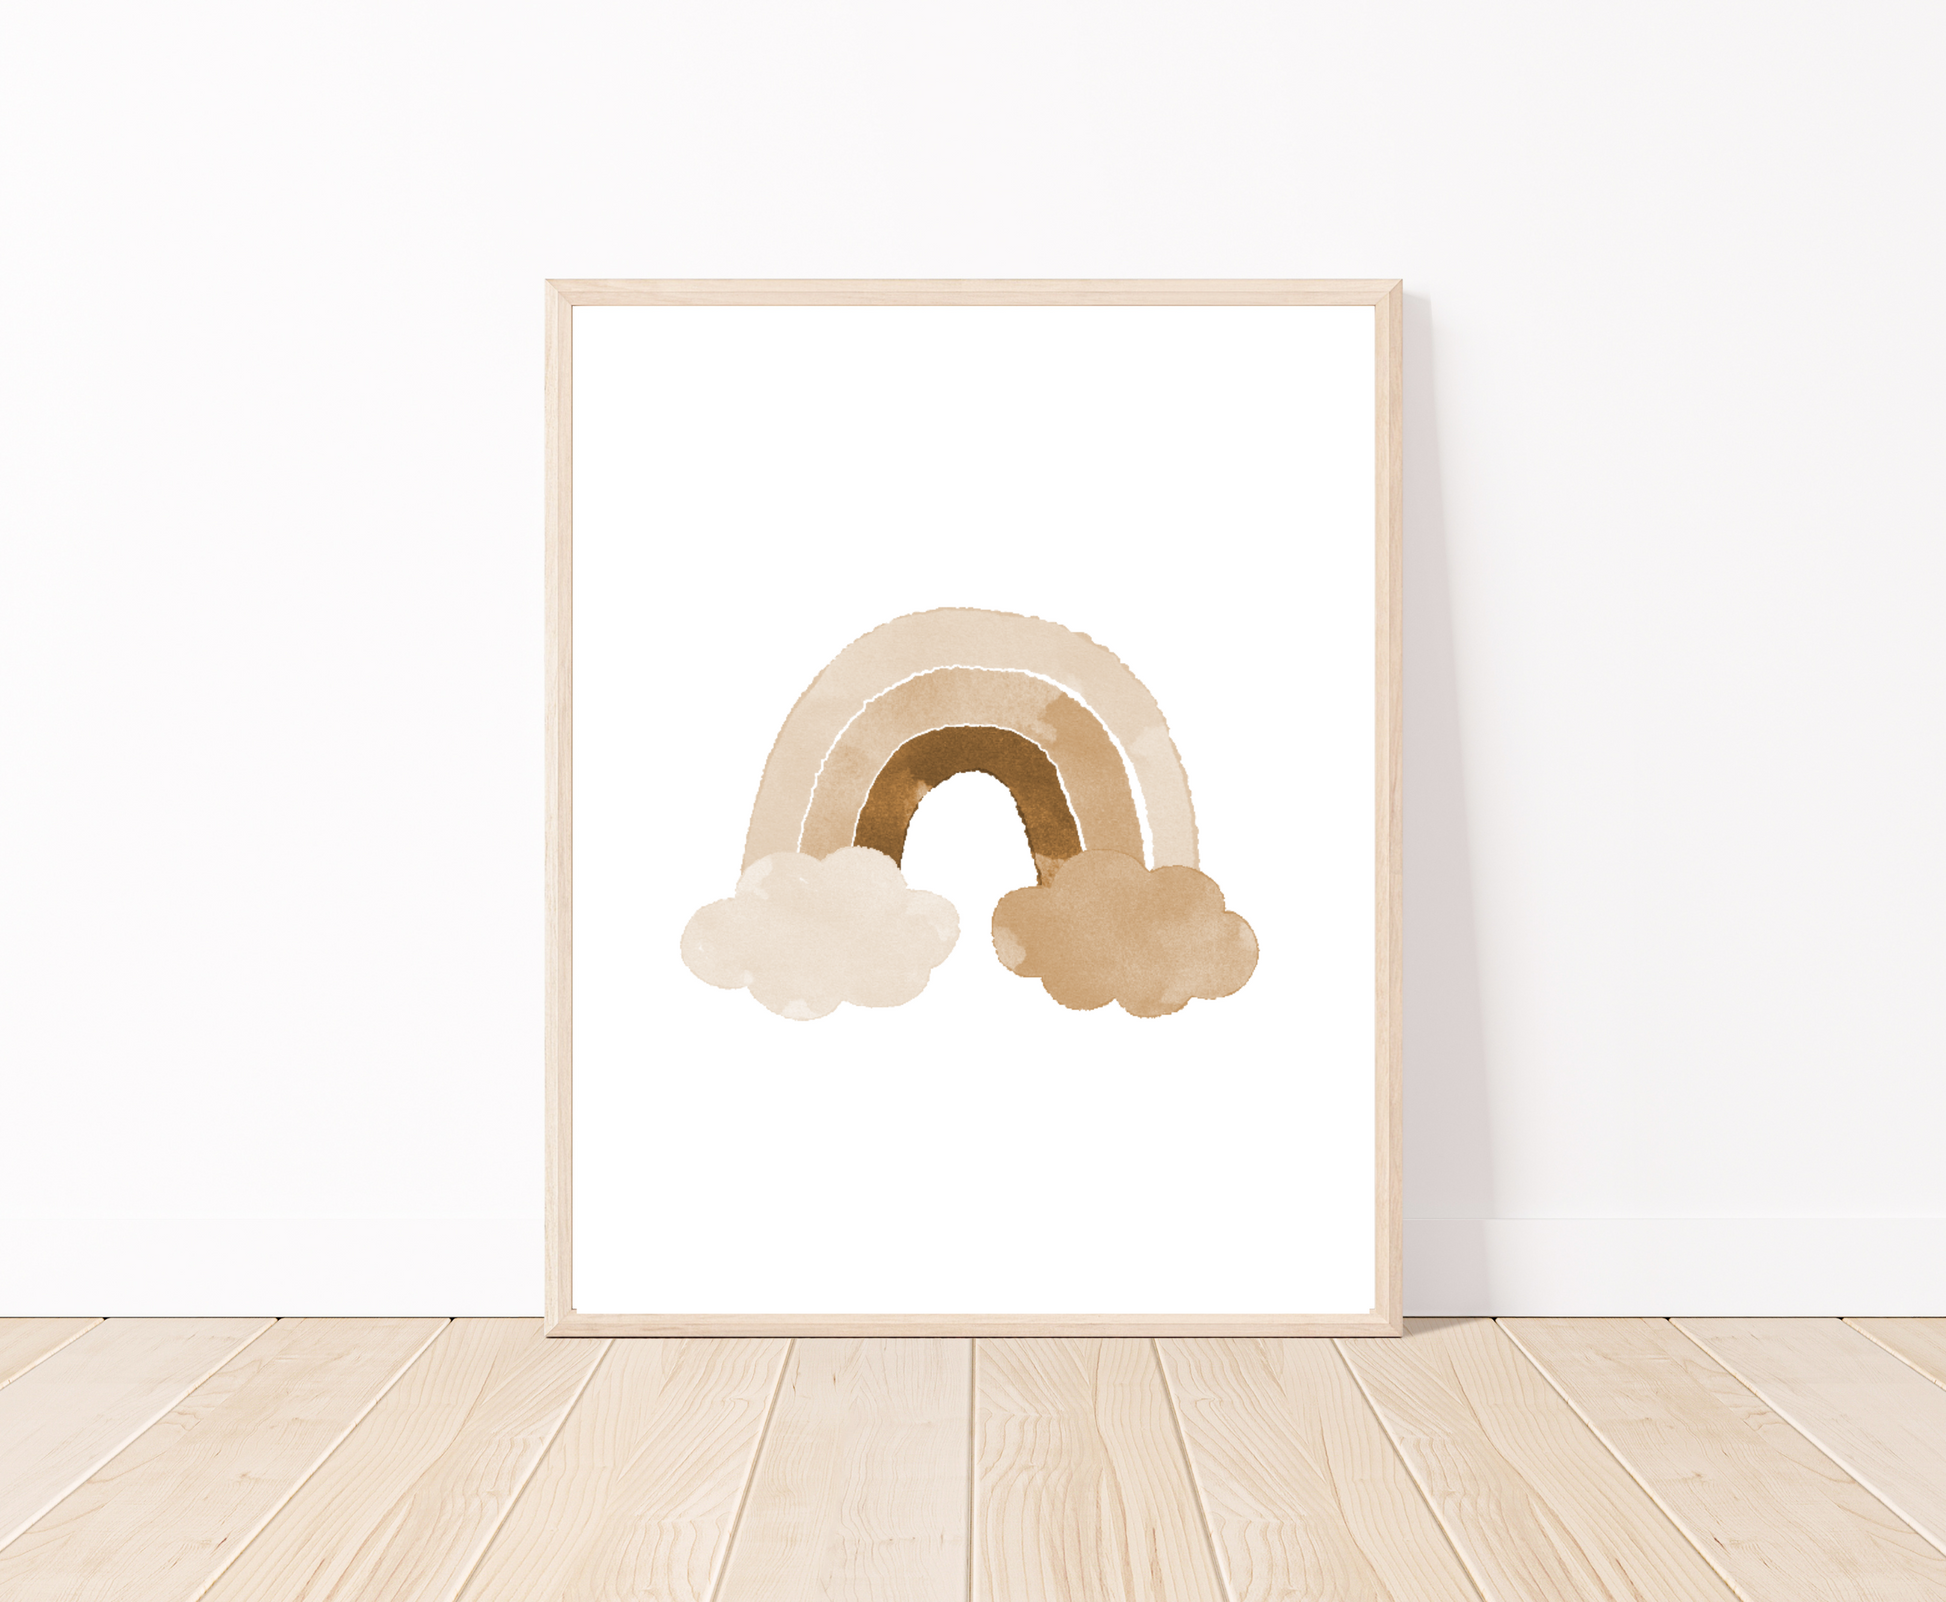 Baby’s digital poster showing a rainbow in different shades of beige behind two clouds. The frame is placed on a parquet floor.